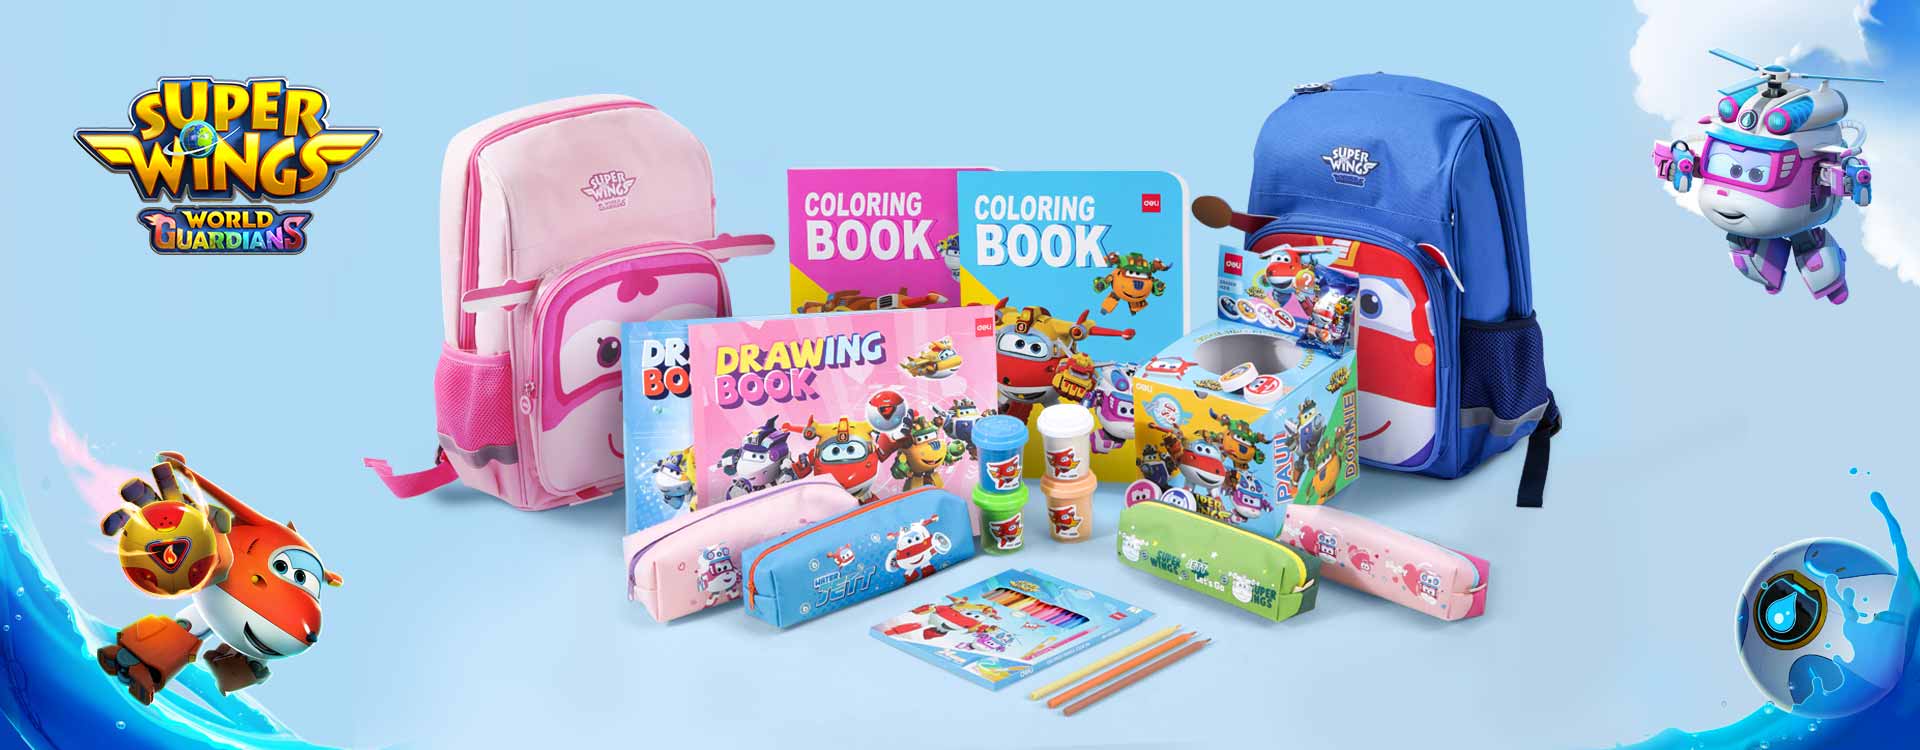 Super Wings Series Stationery